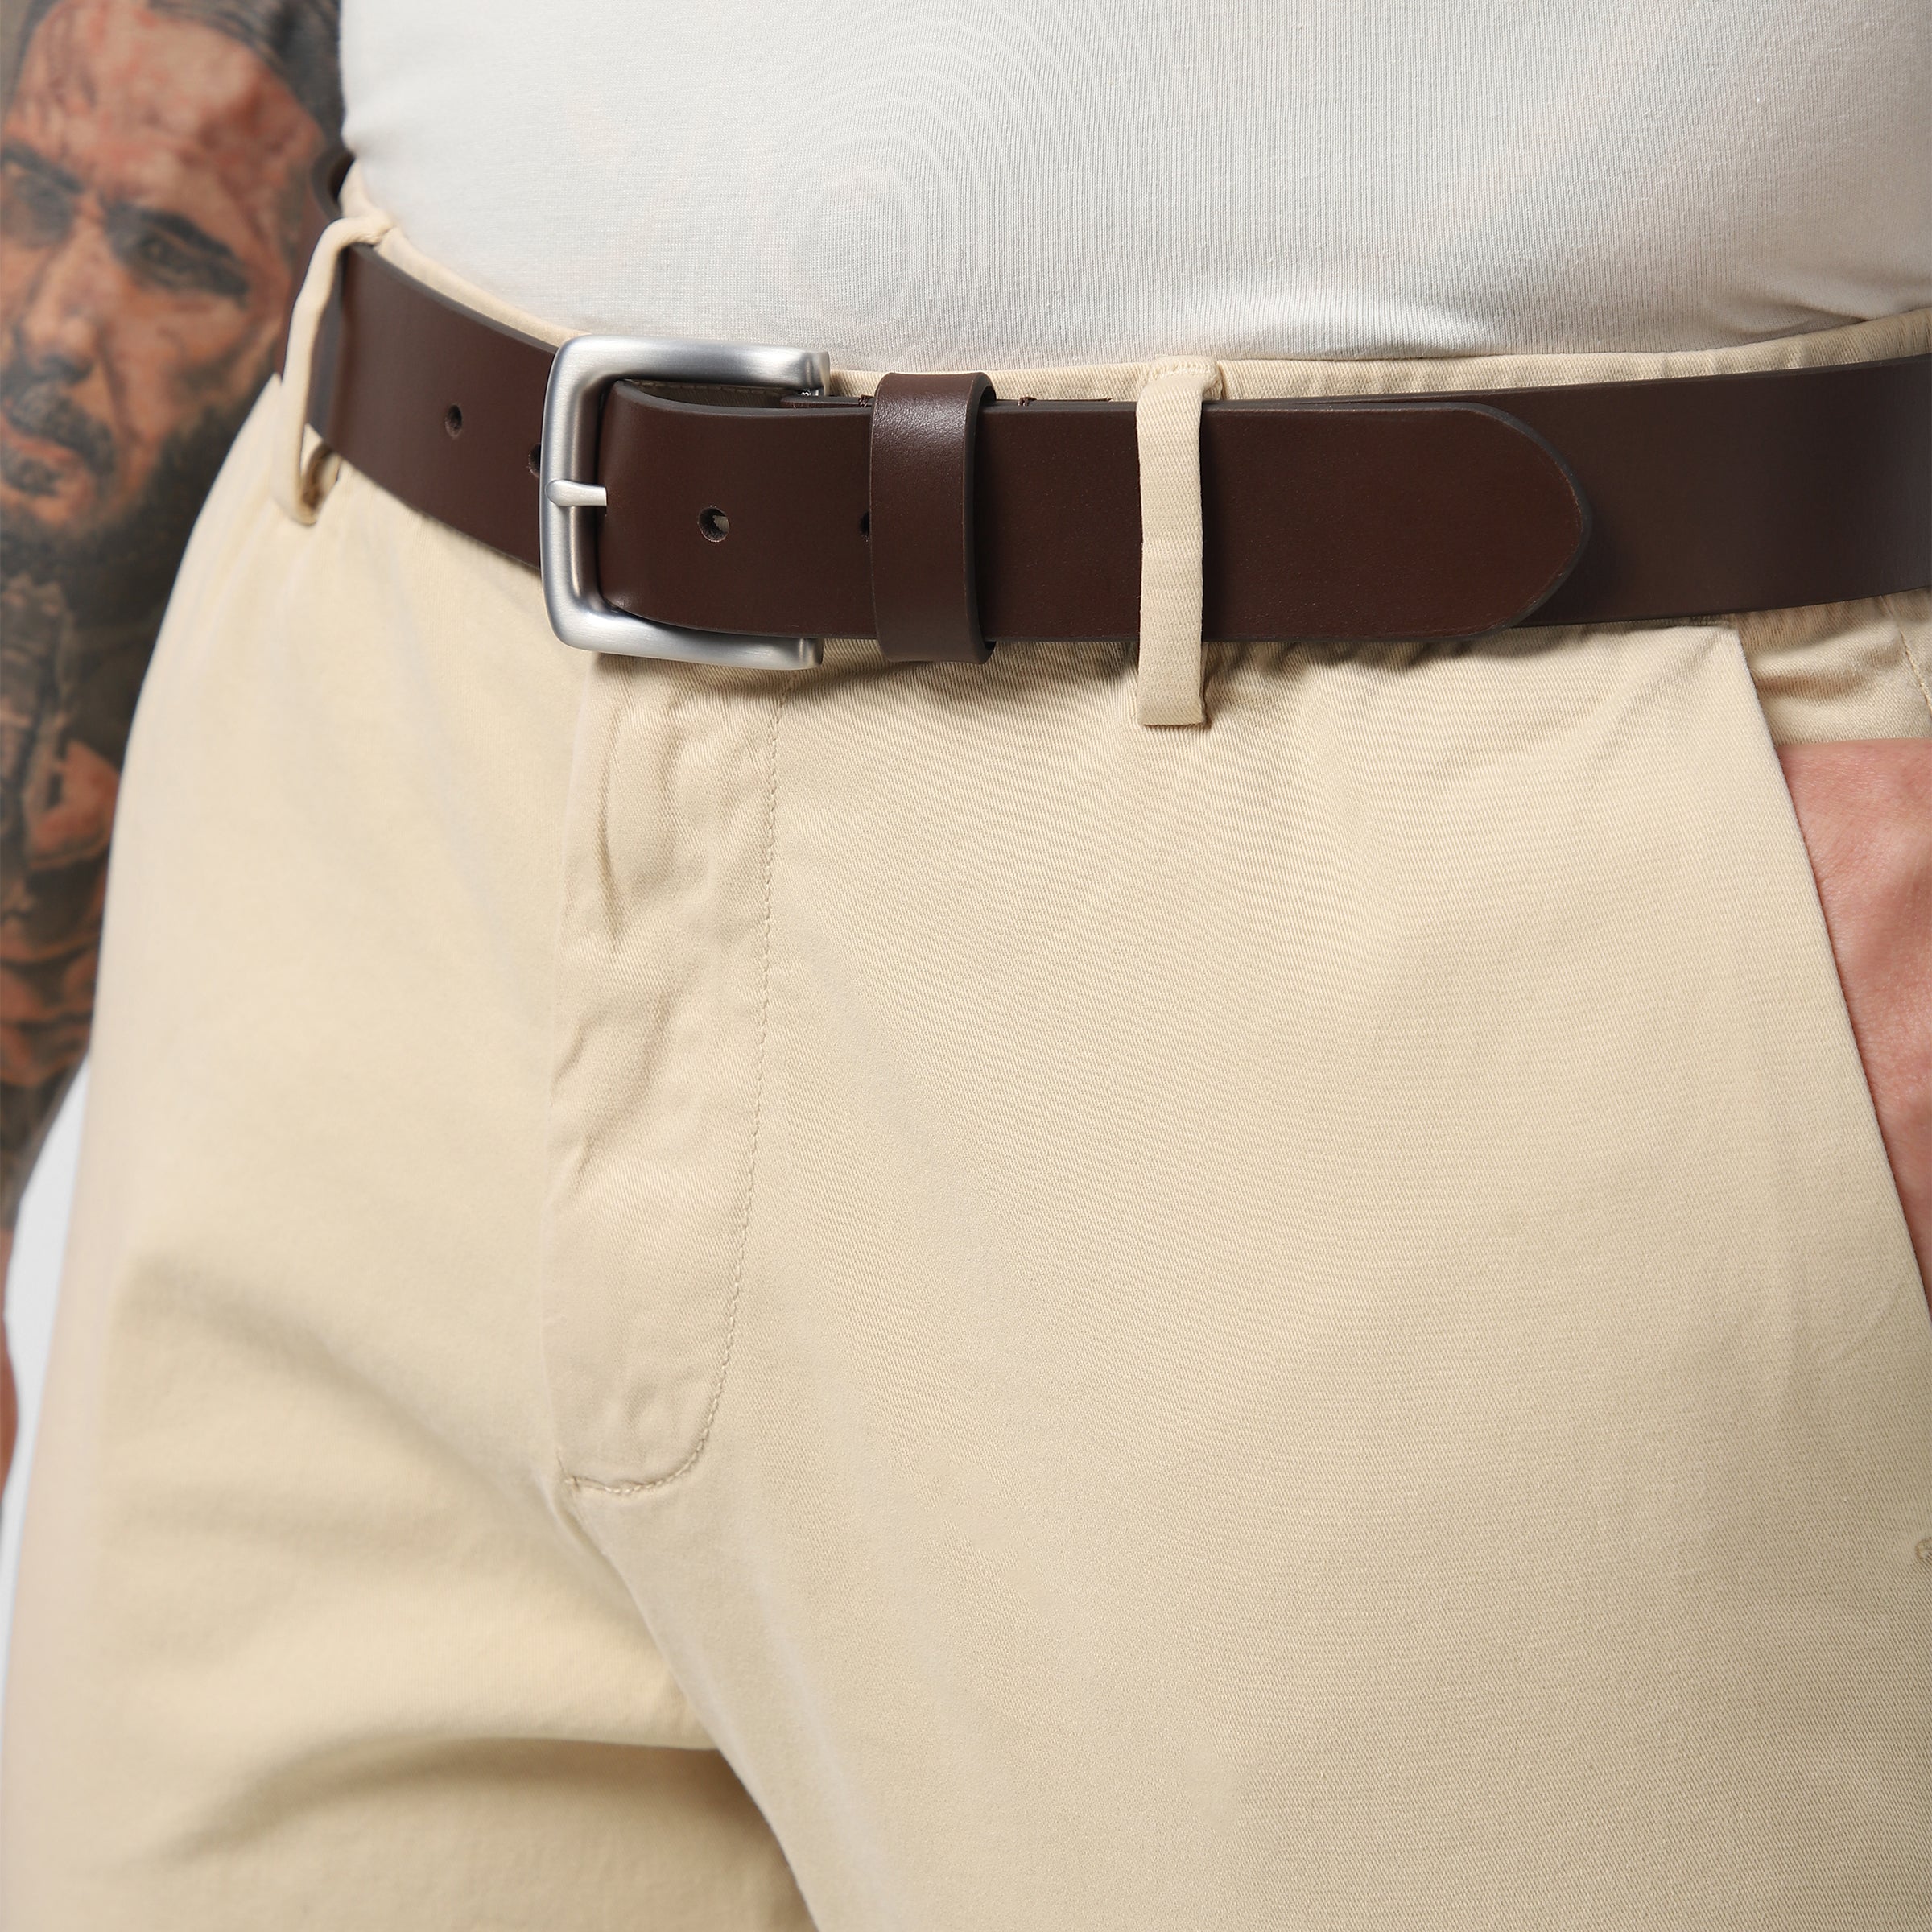 Daily Leather Belt Medium Brown close up on model